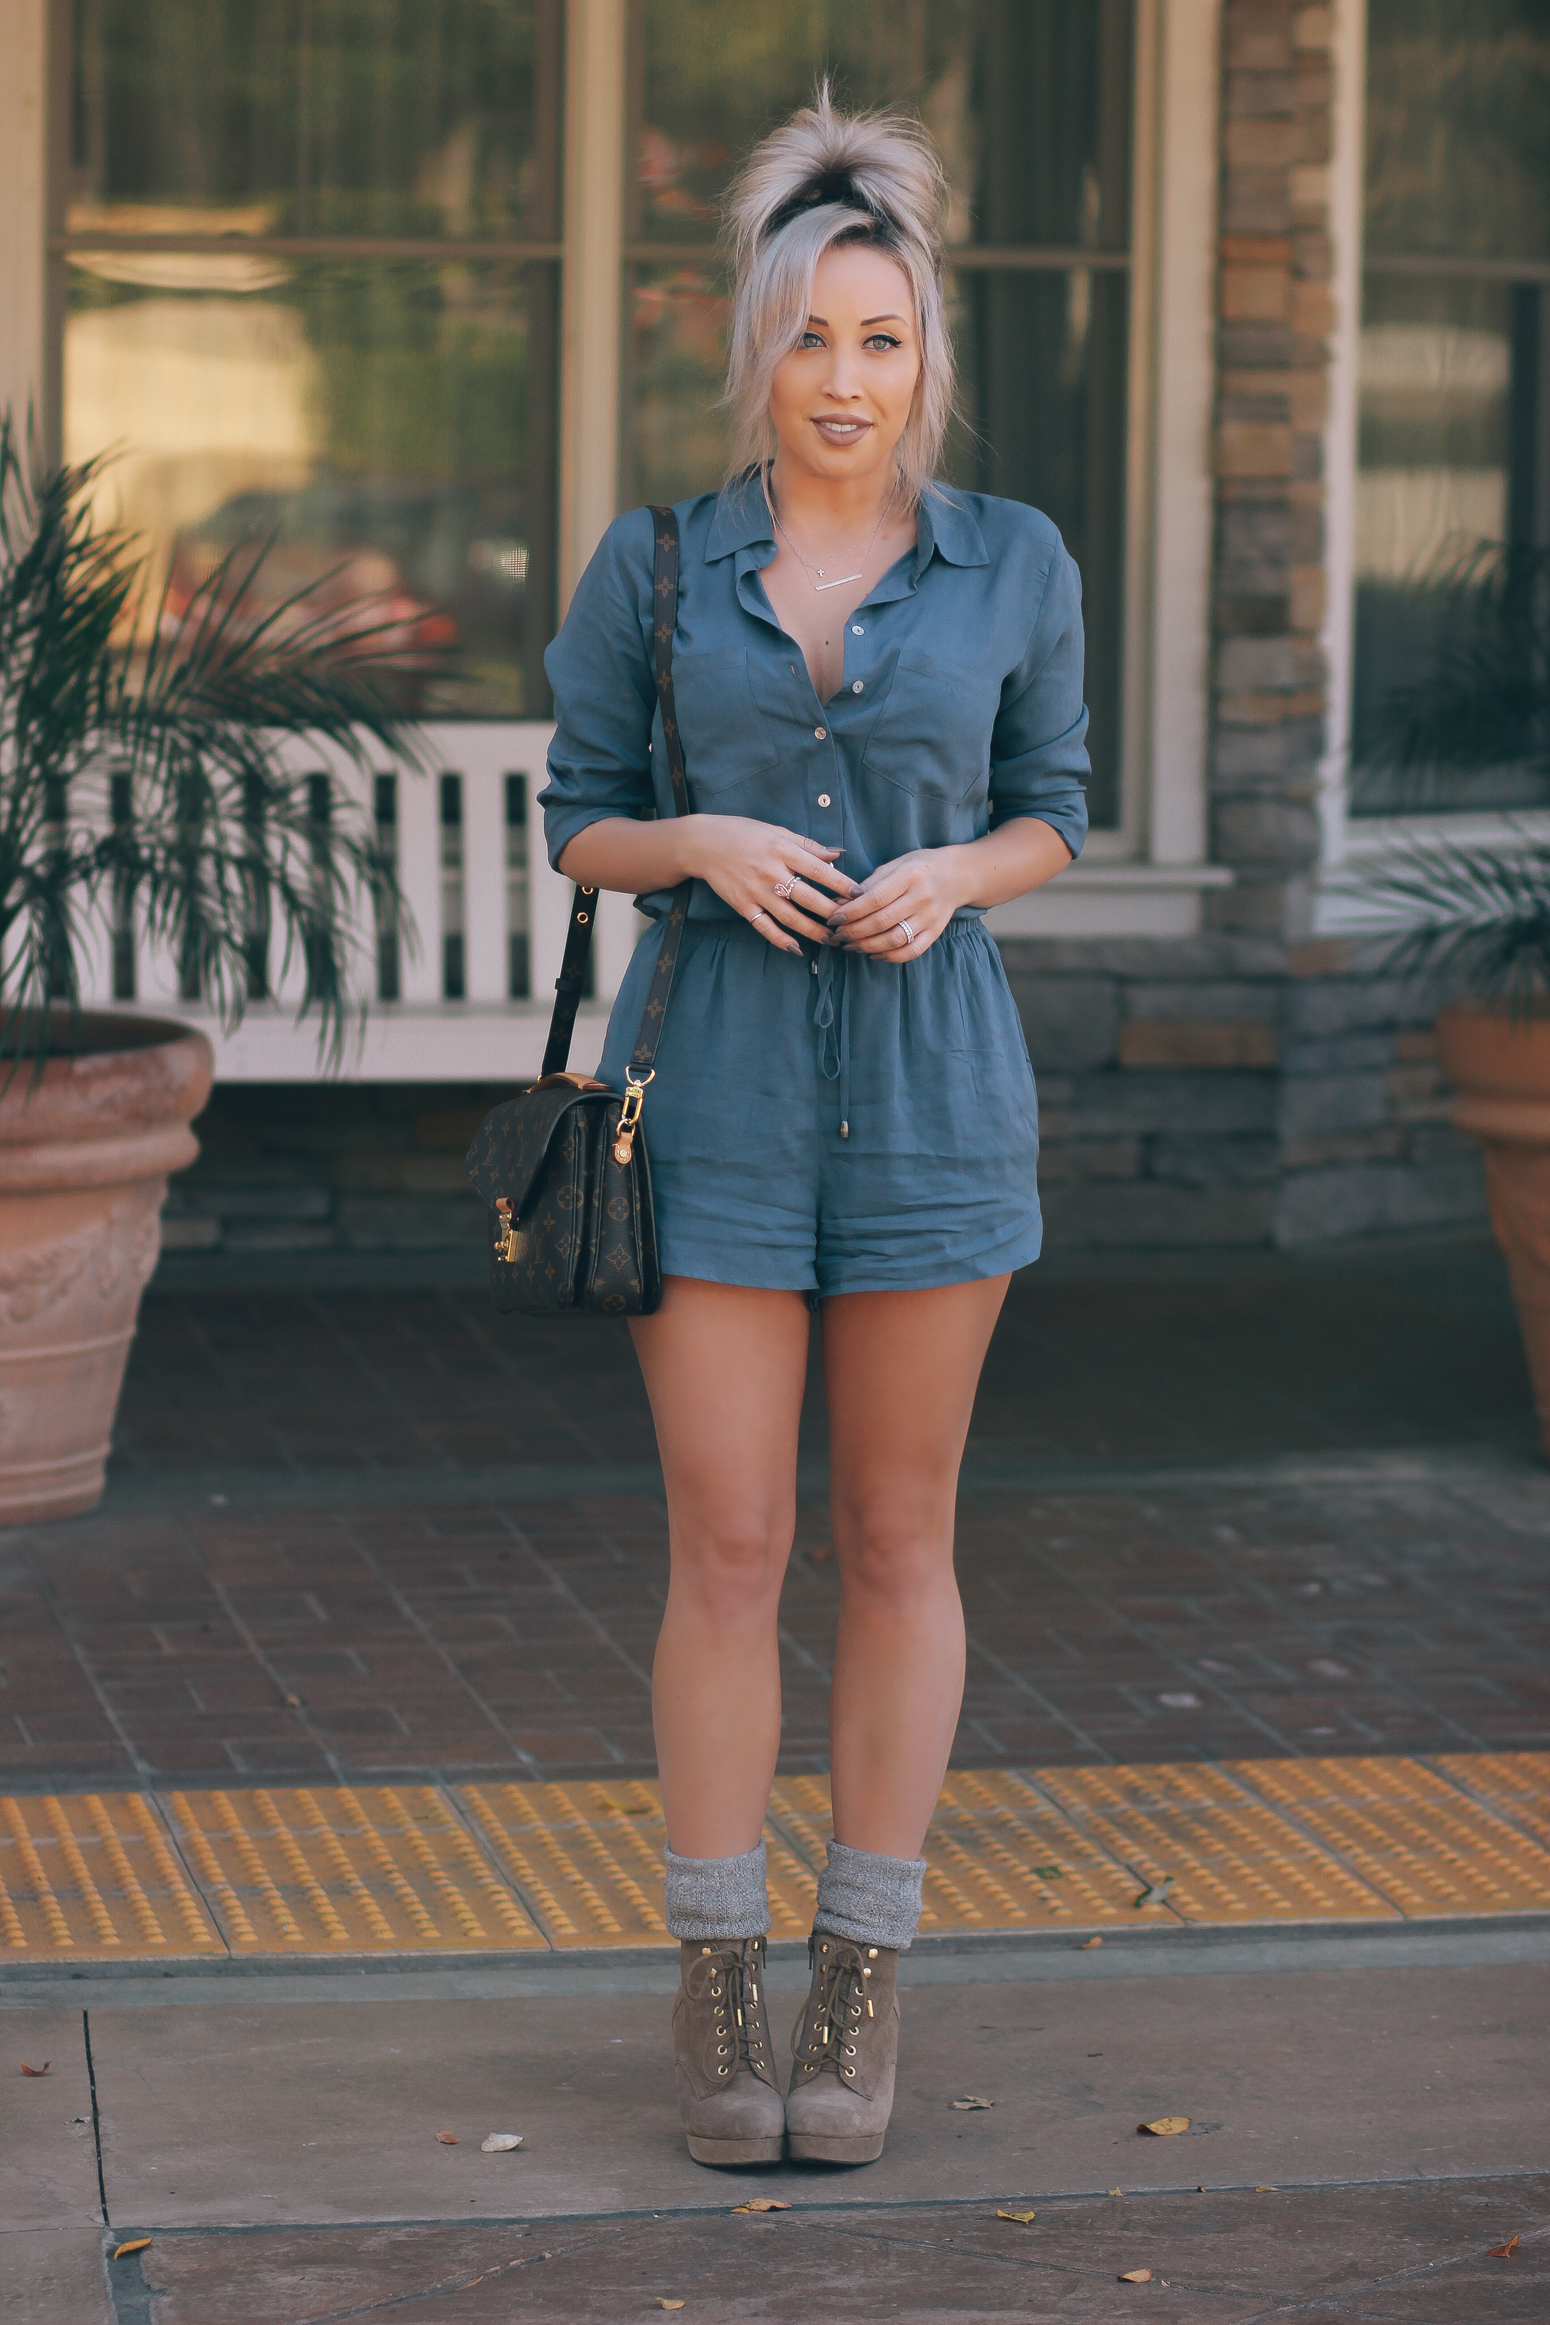 Blondie in the City | Blue Button Up Romper and Socks with Booties | Louis Vuitton Pochette Metis